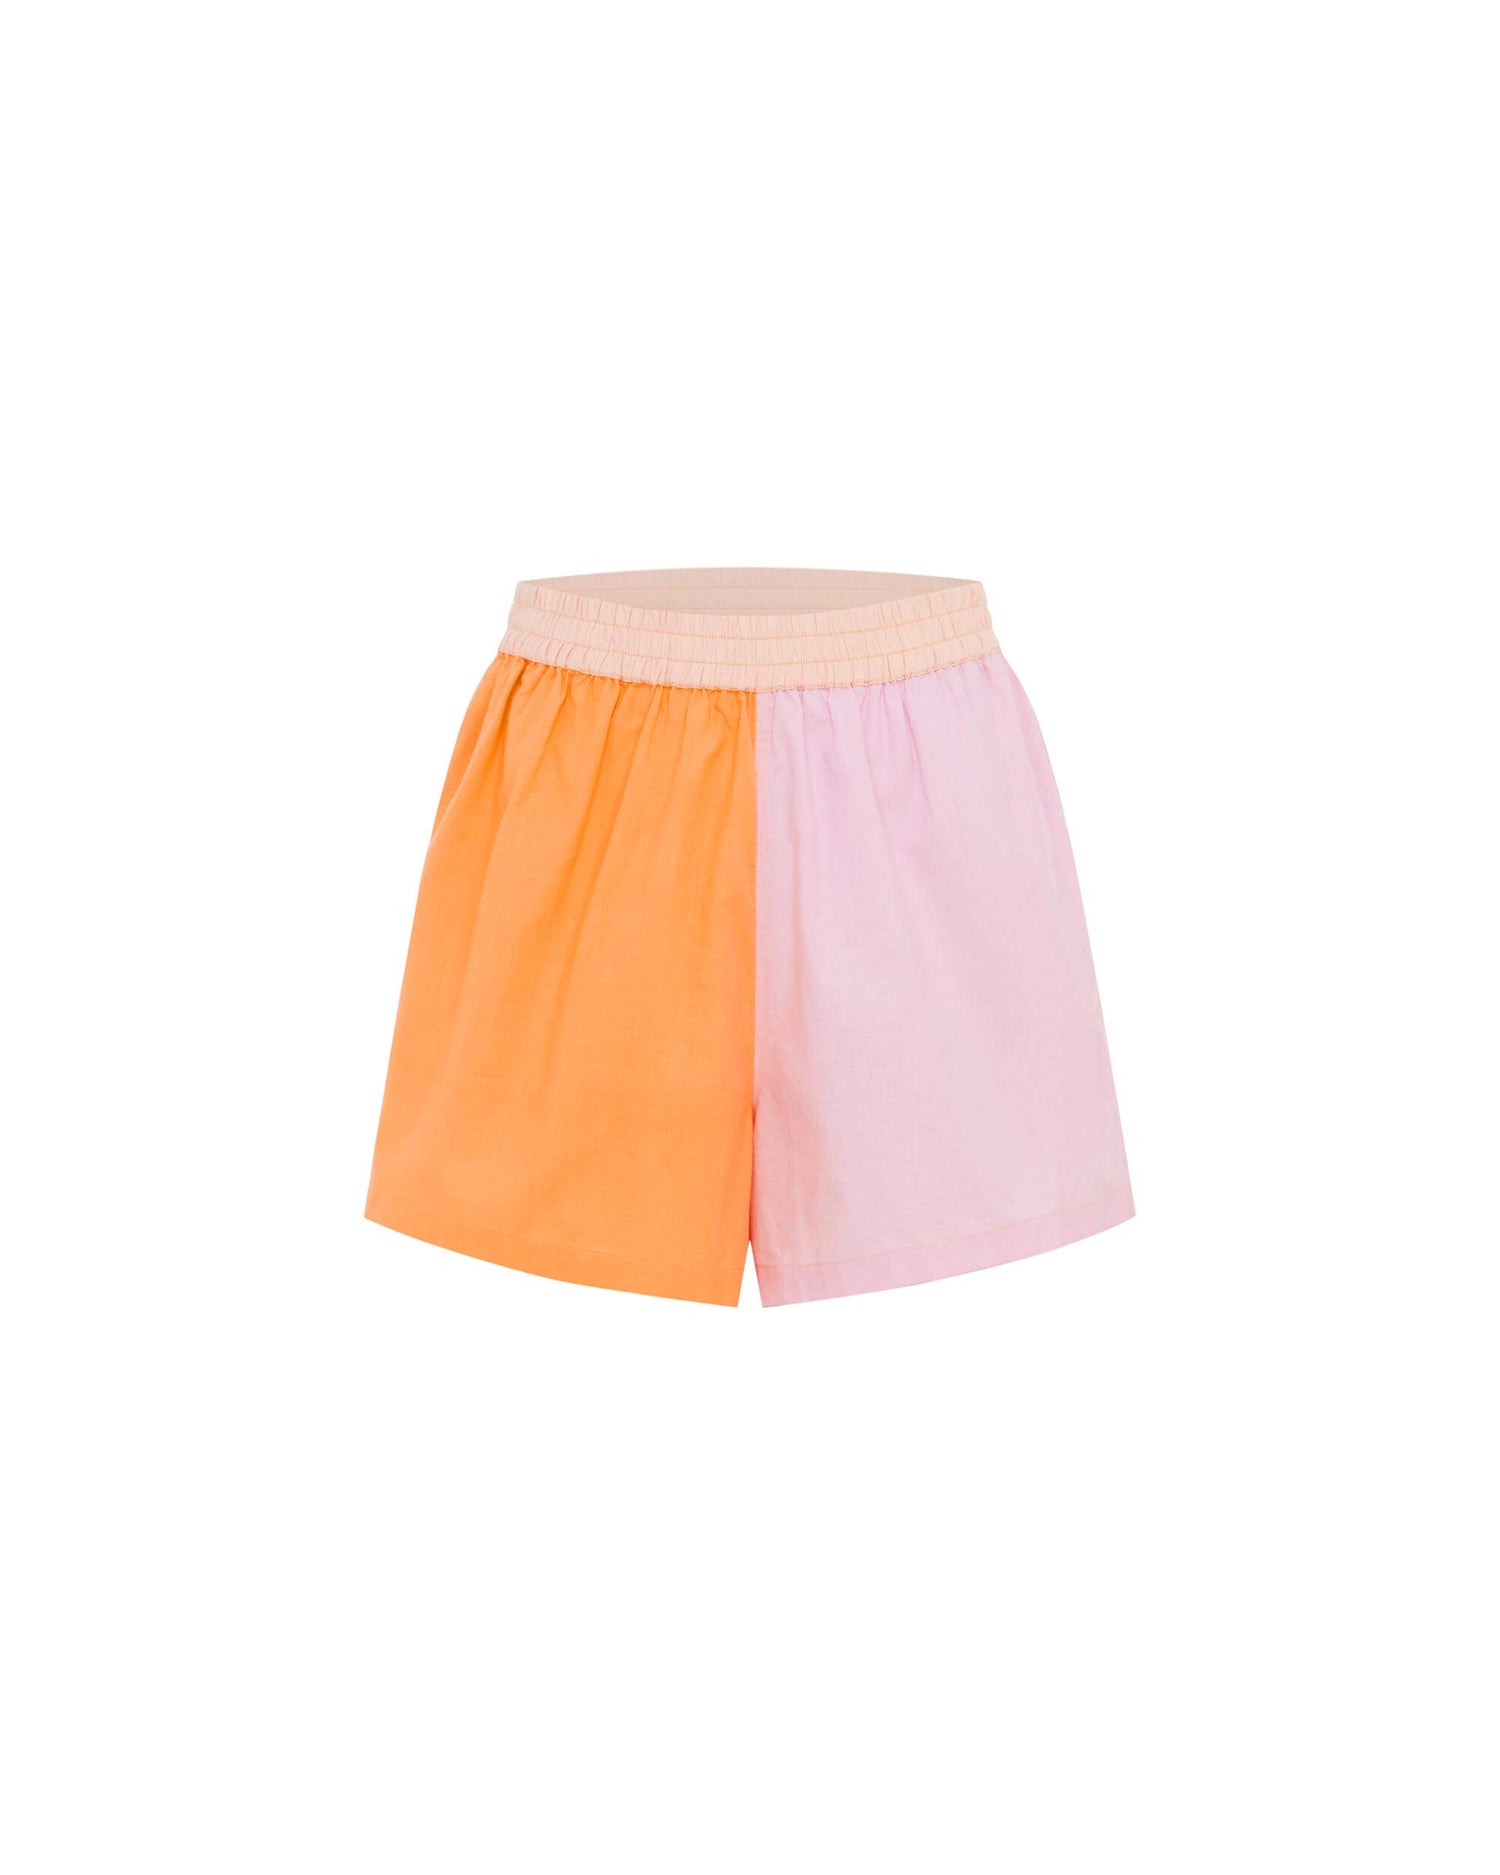 It's Now Cool Beachwear - Vacay Short - Sunkissed